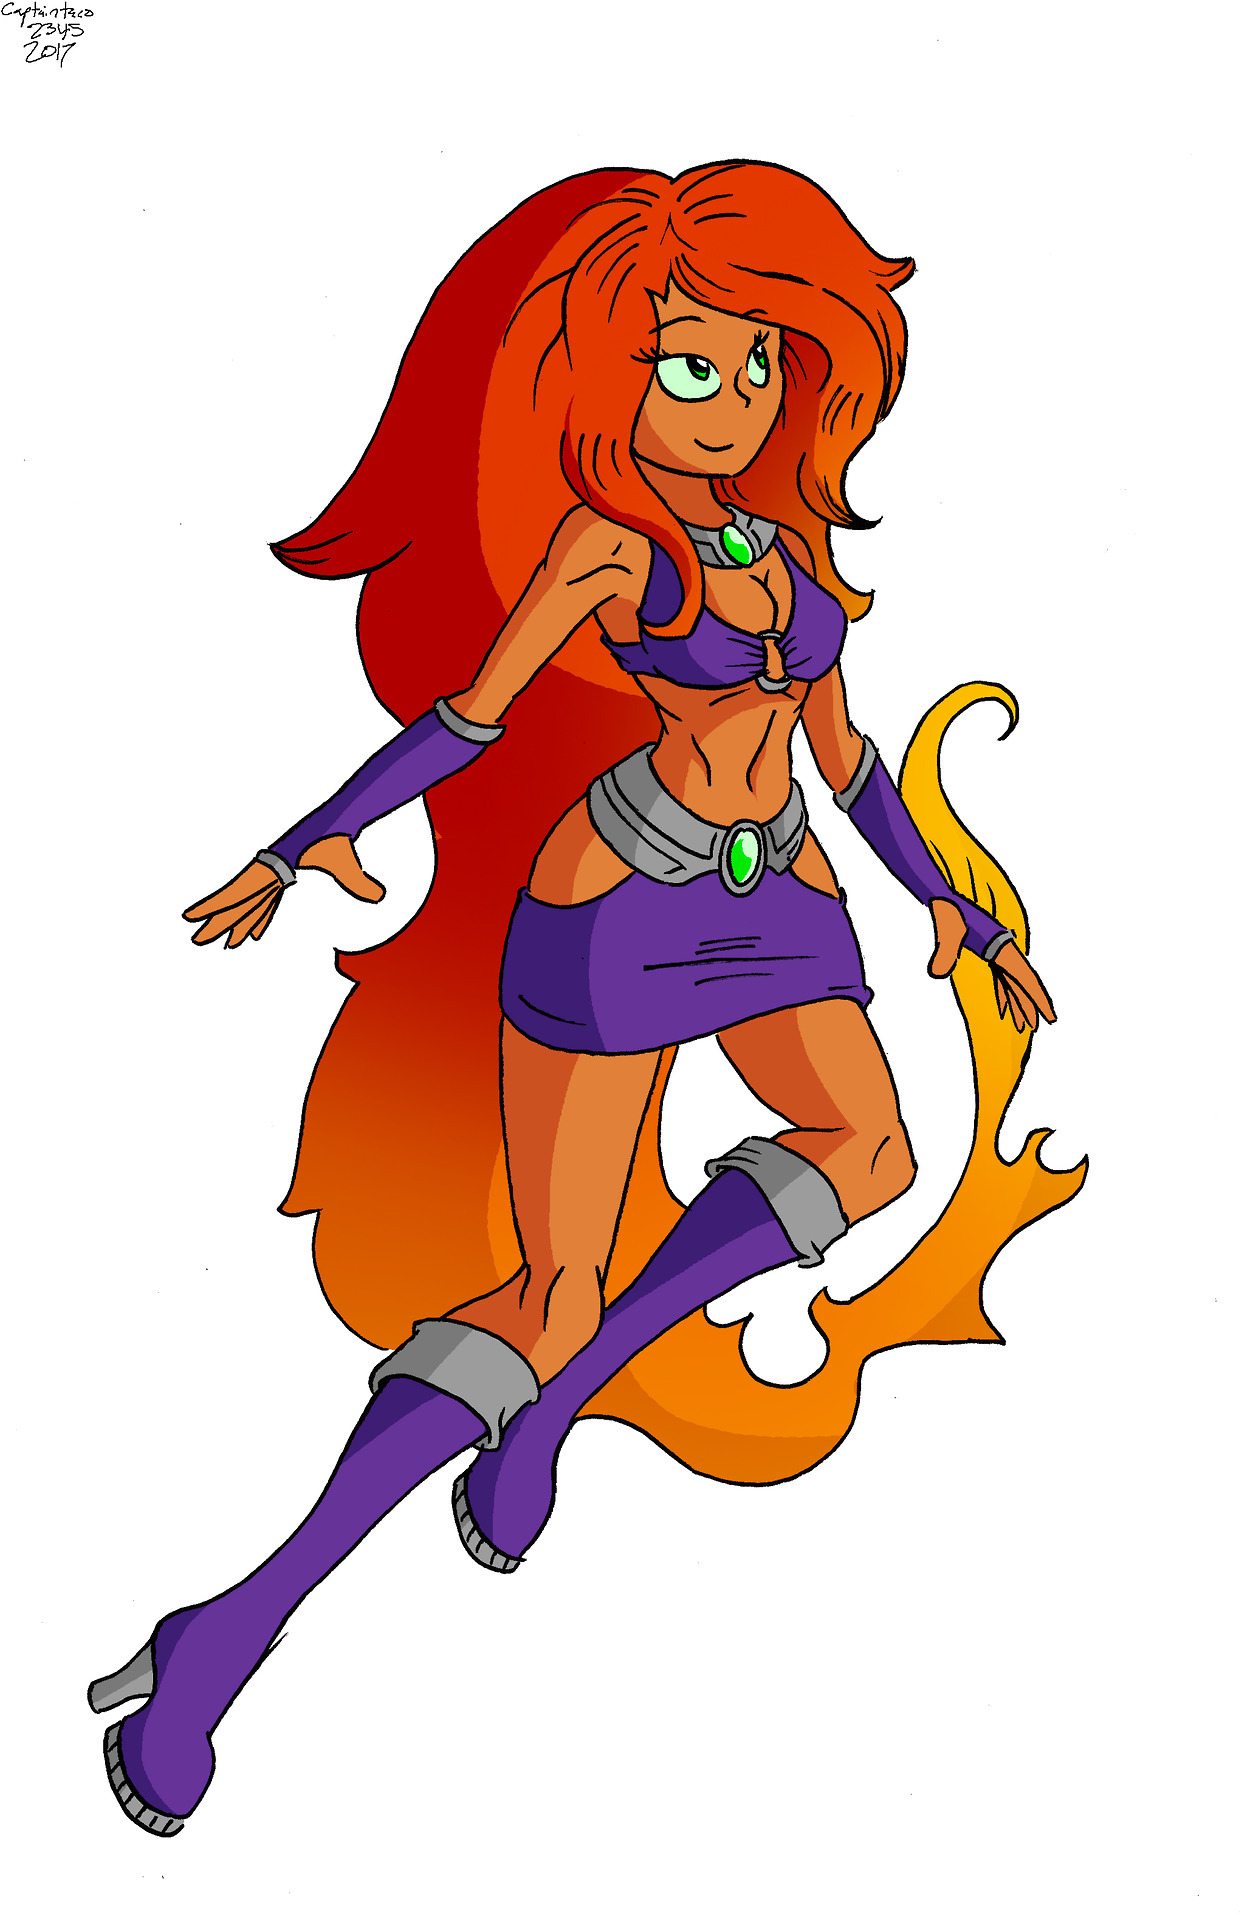 I’m not the biggest Starfire fan, I’m more of a Raven guy. But Starfire is super